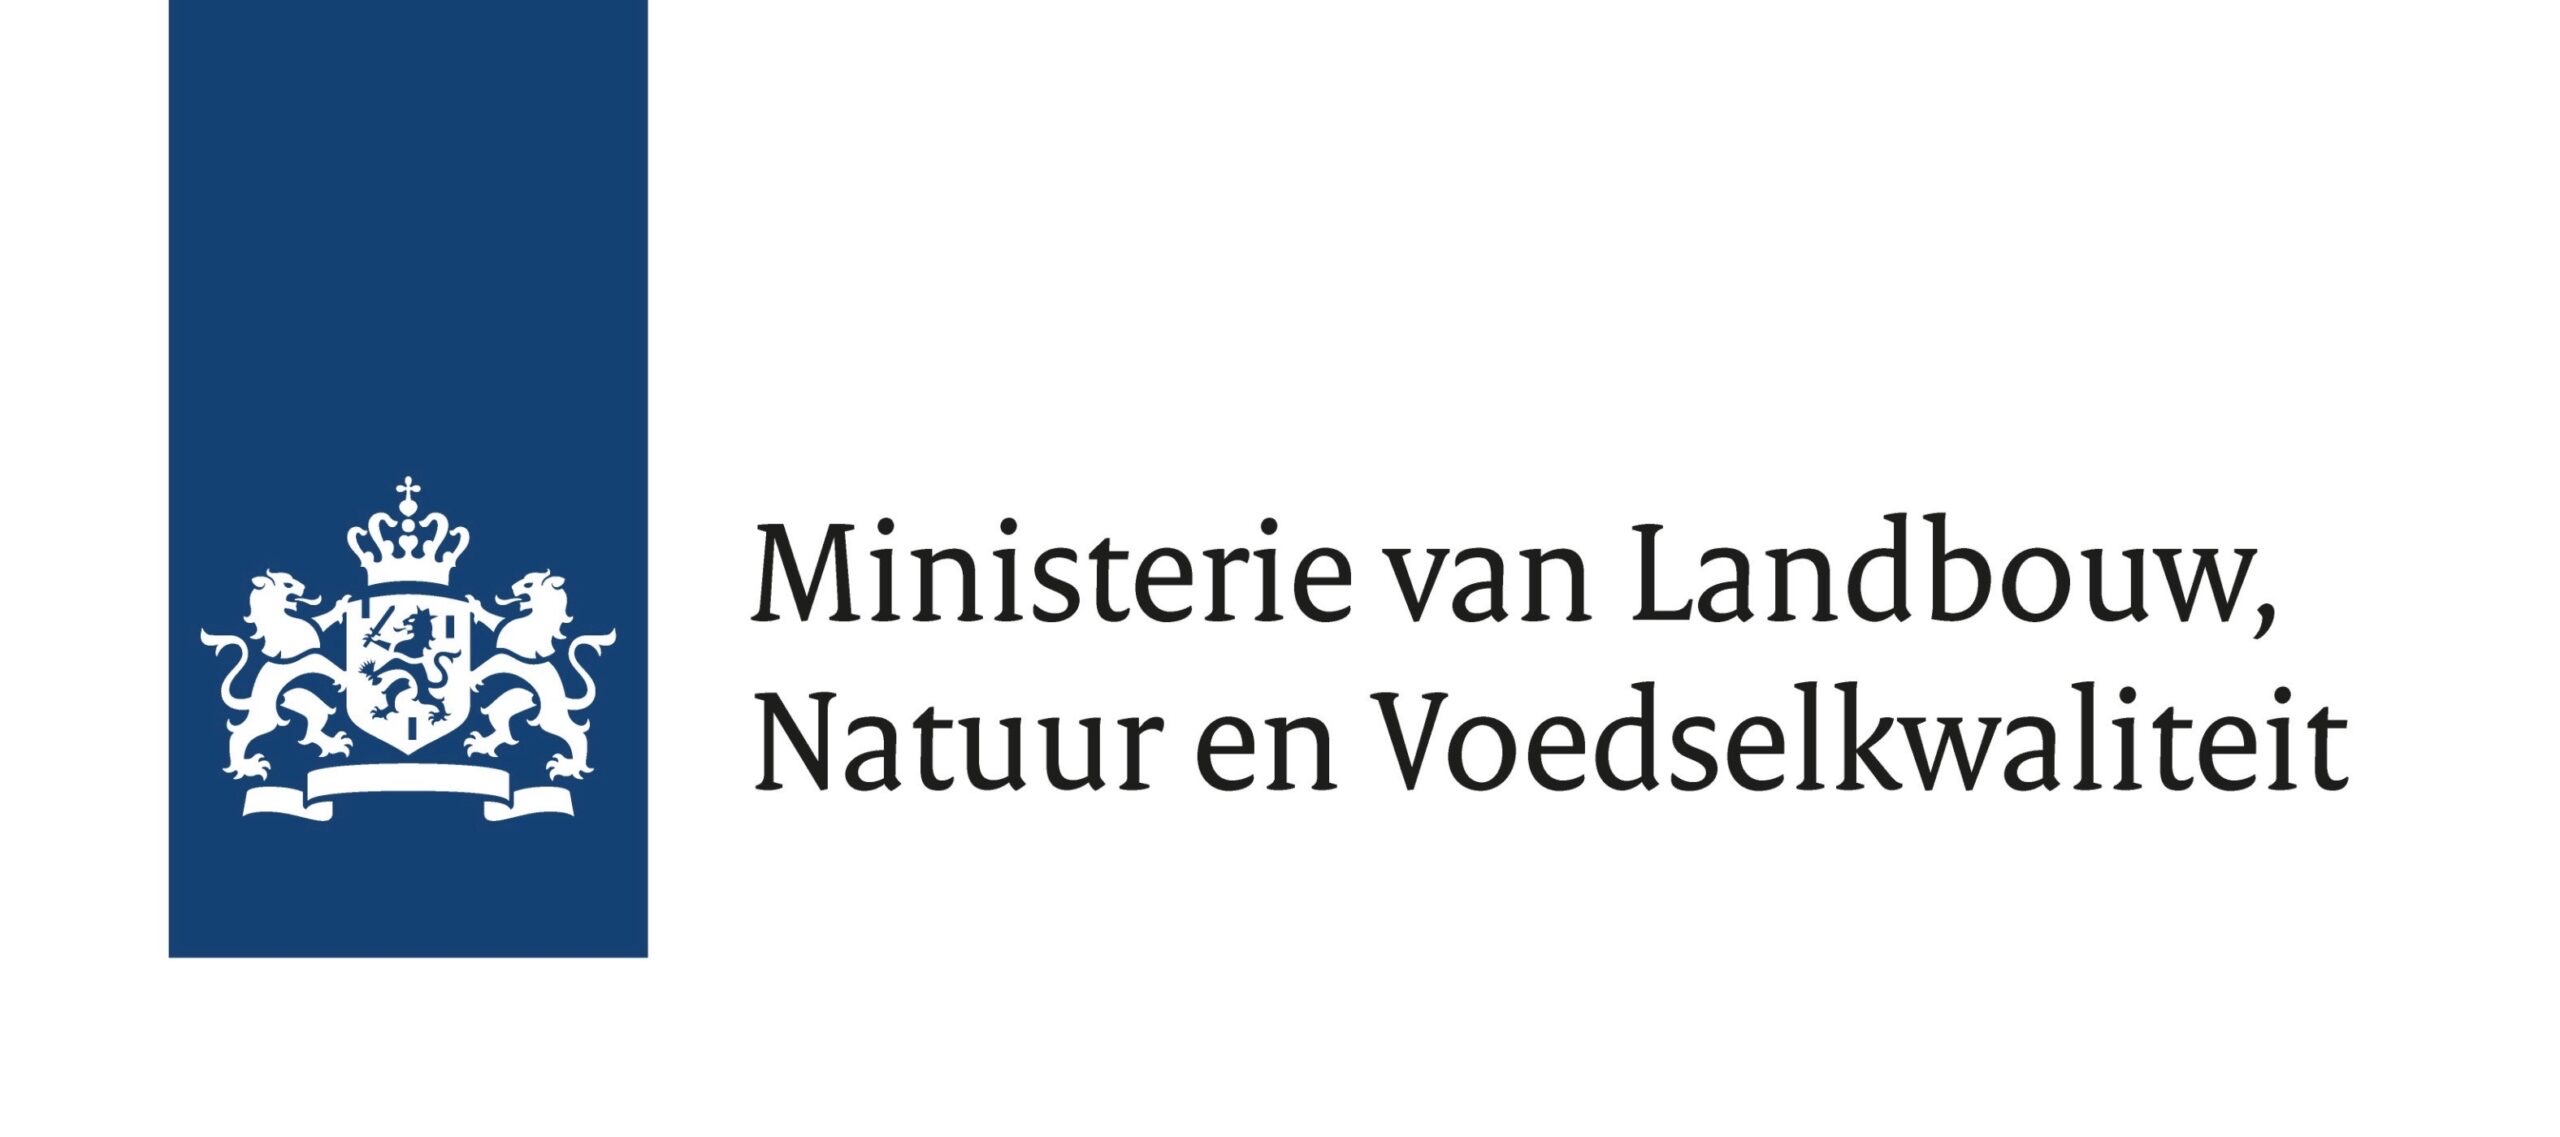 Ministry of Agriculture, Nature and Food Quality, The Government of The Netherlands